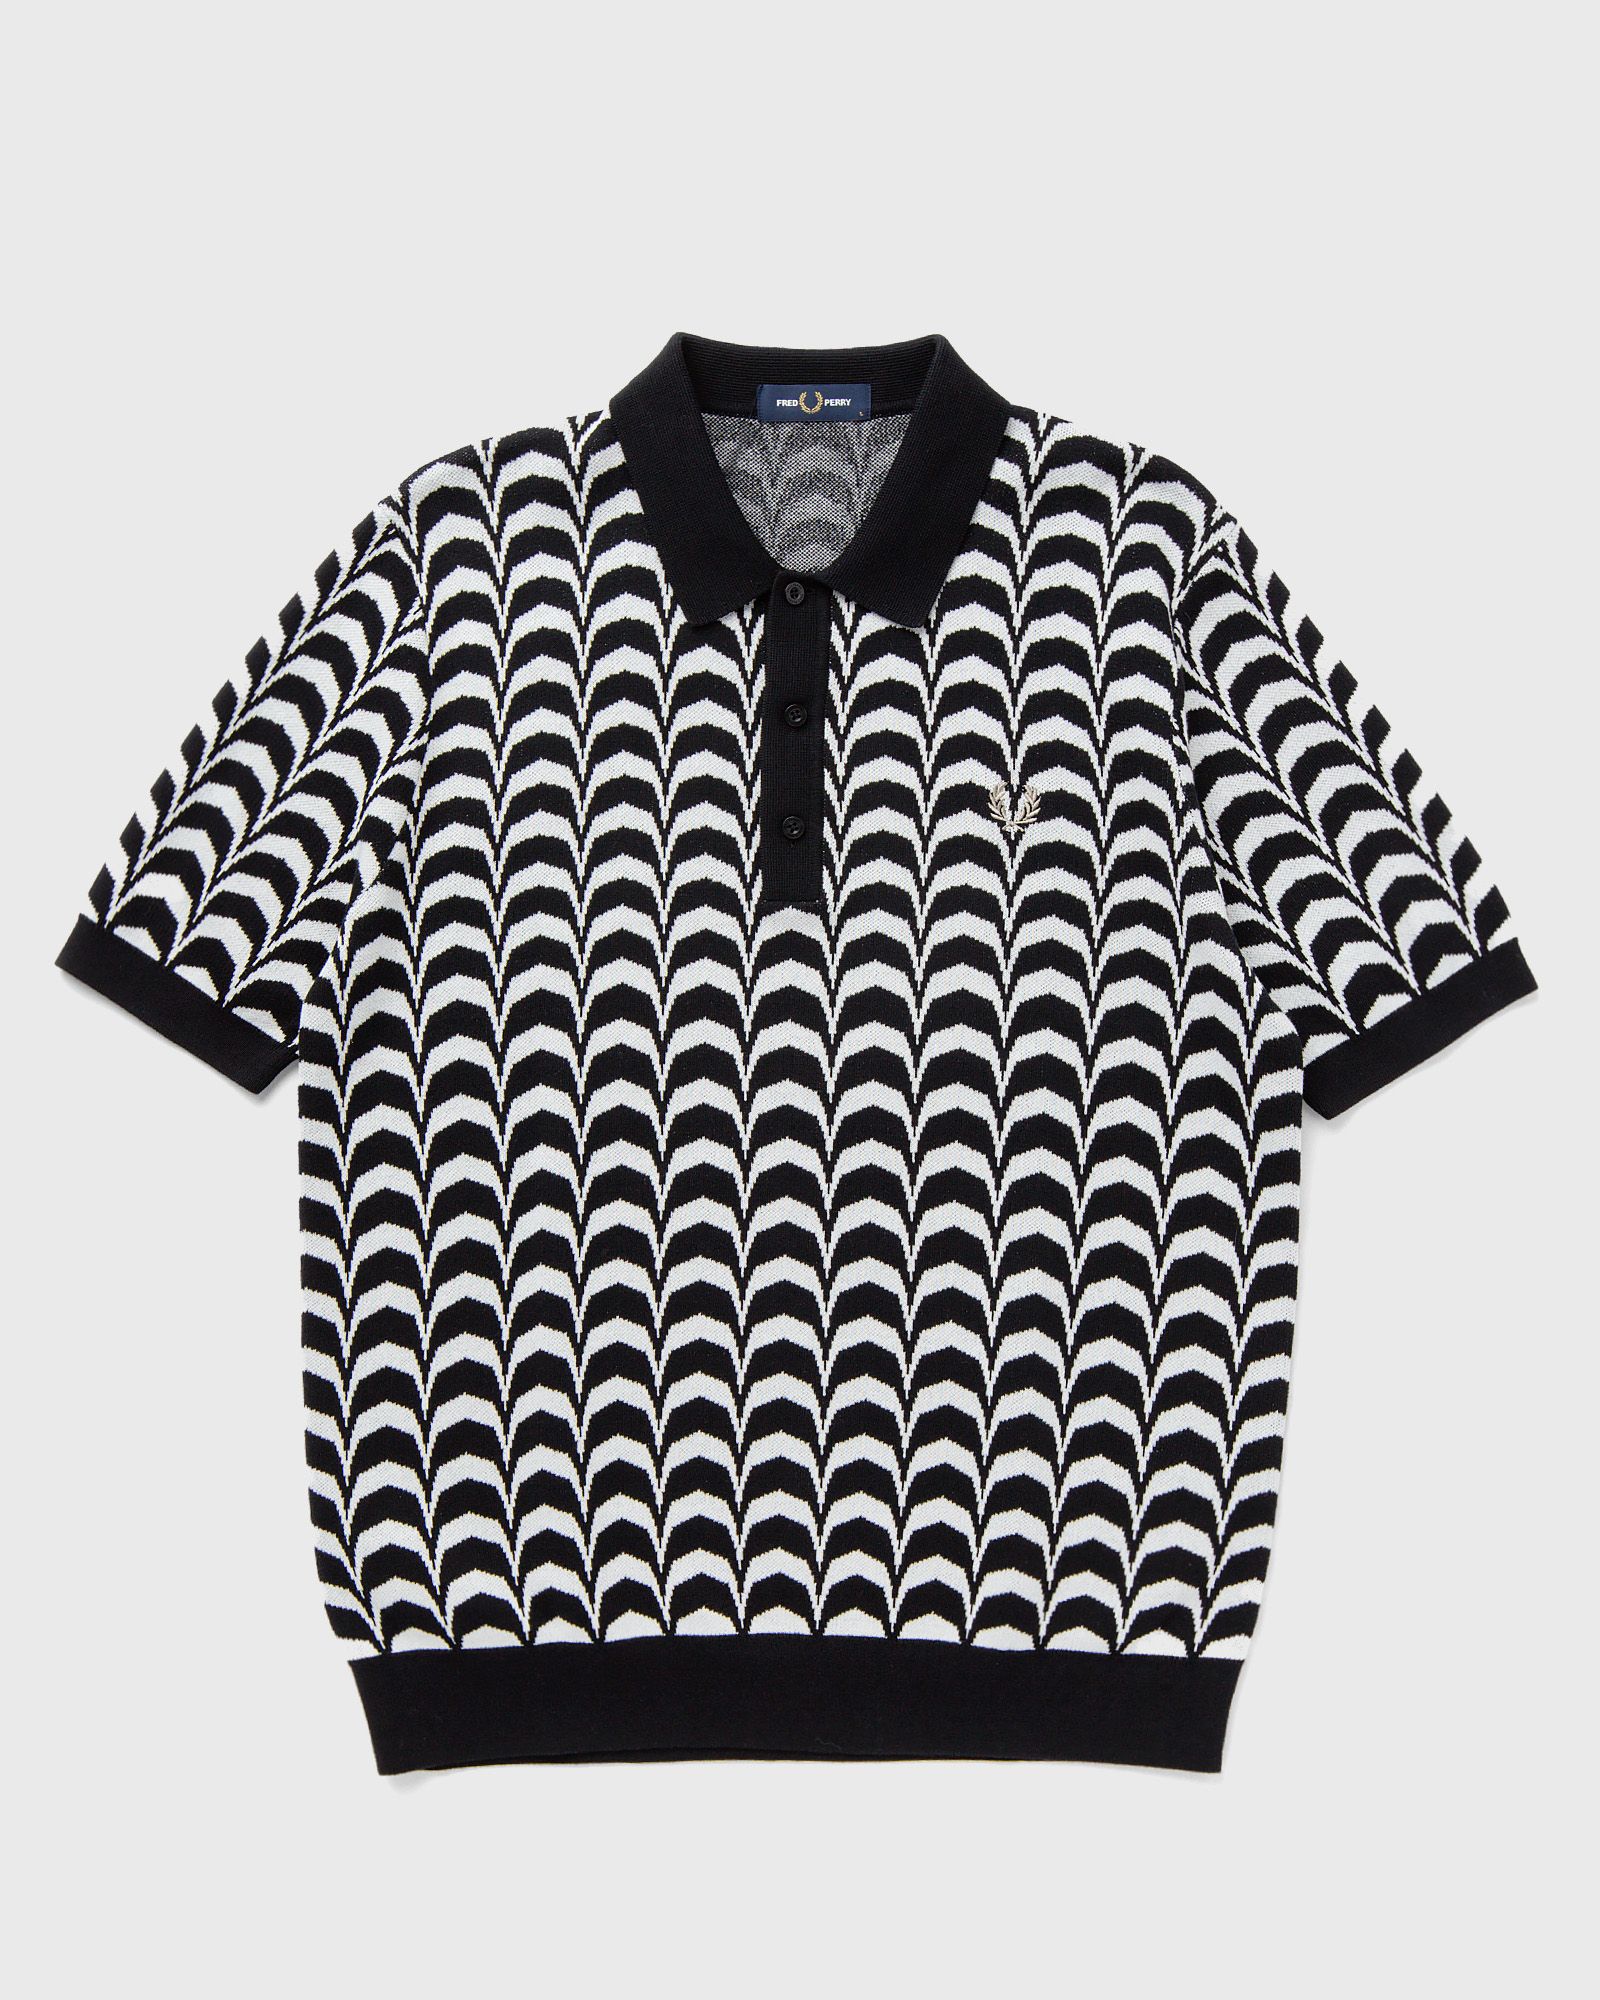 Fred Perry Jacquard Knitted Shirt men Polos black|white in Größe:S von Fred Perry